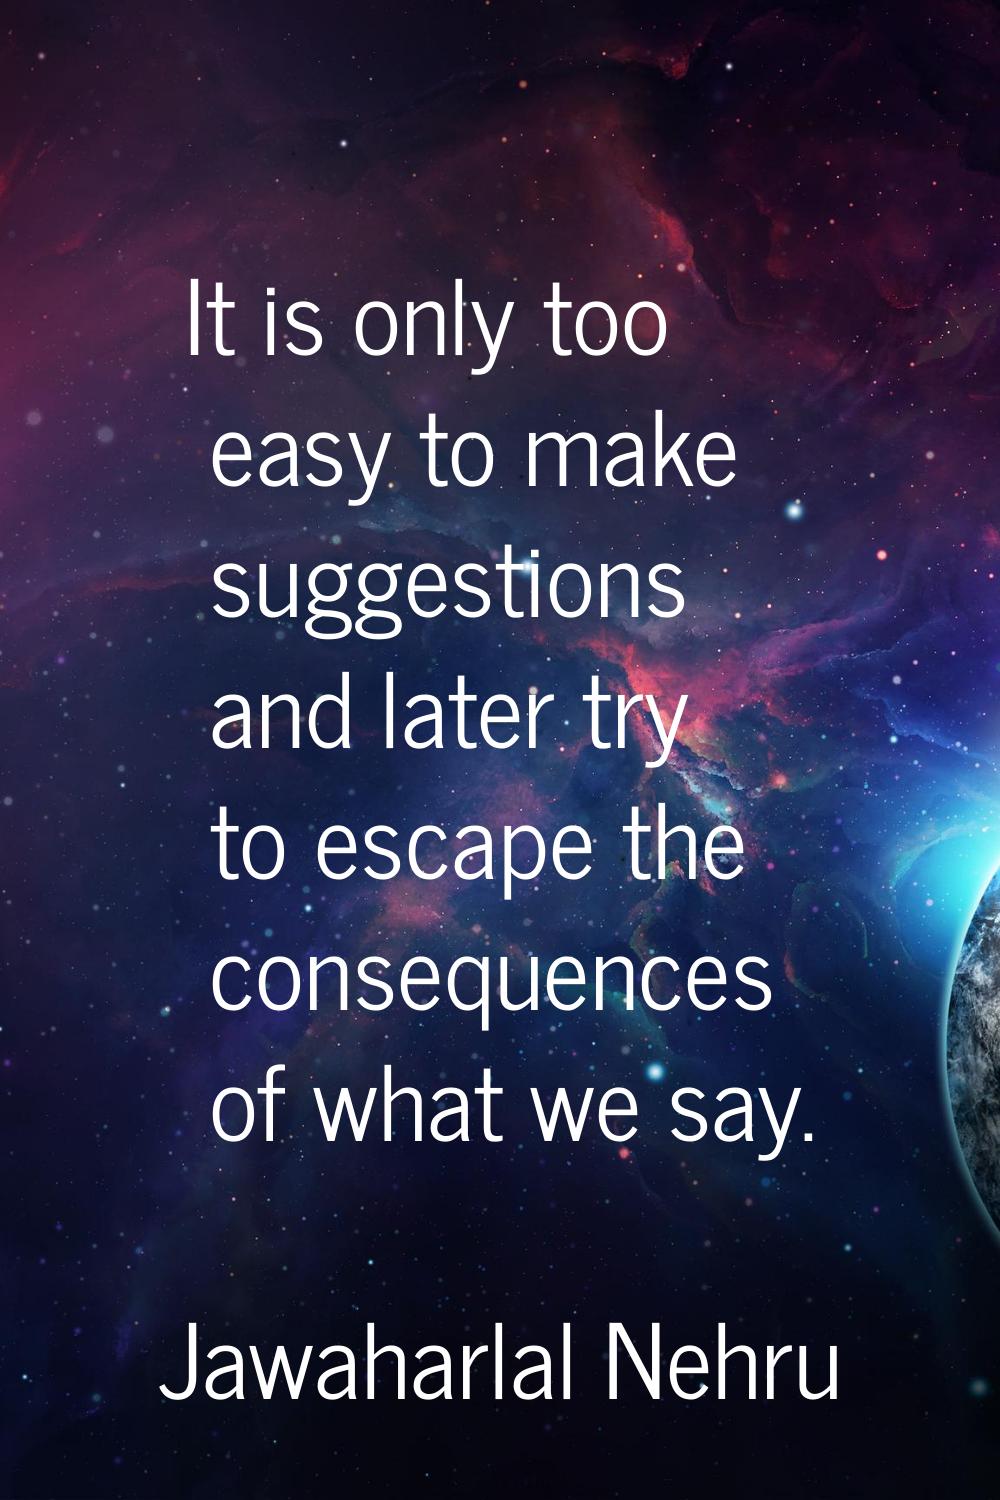 It is only too easy to make suggestions and later try to escape the consequences of what we say.